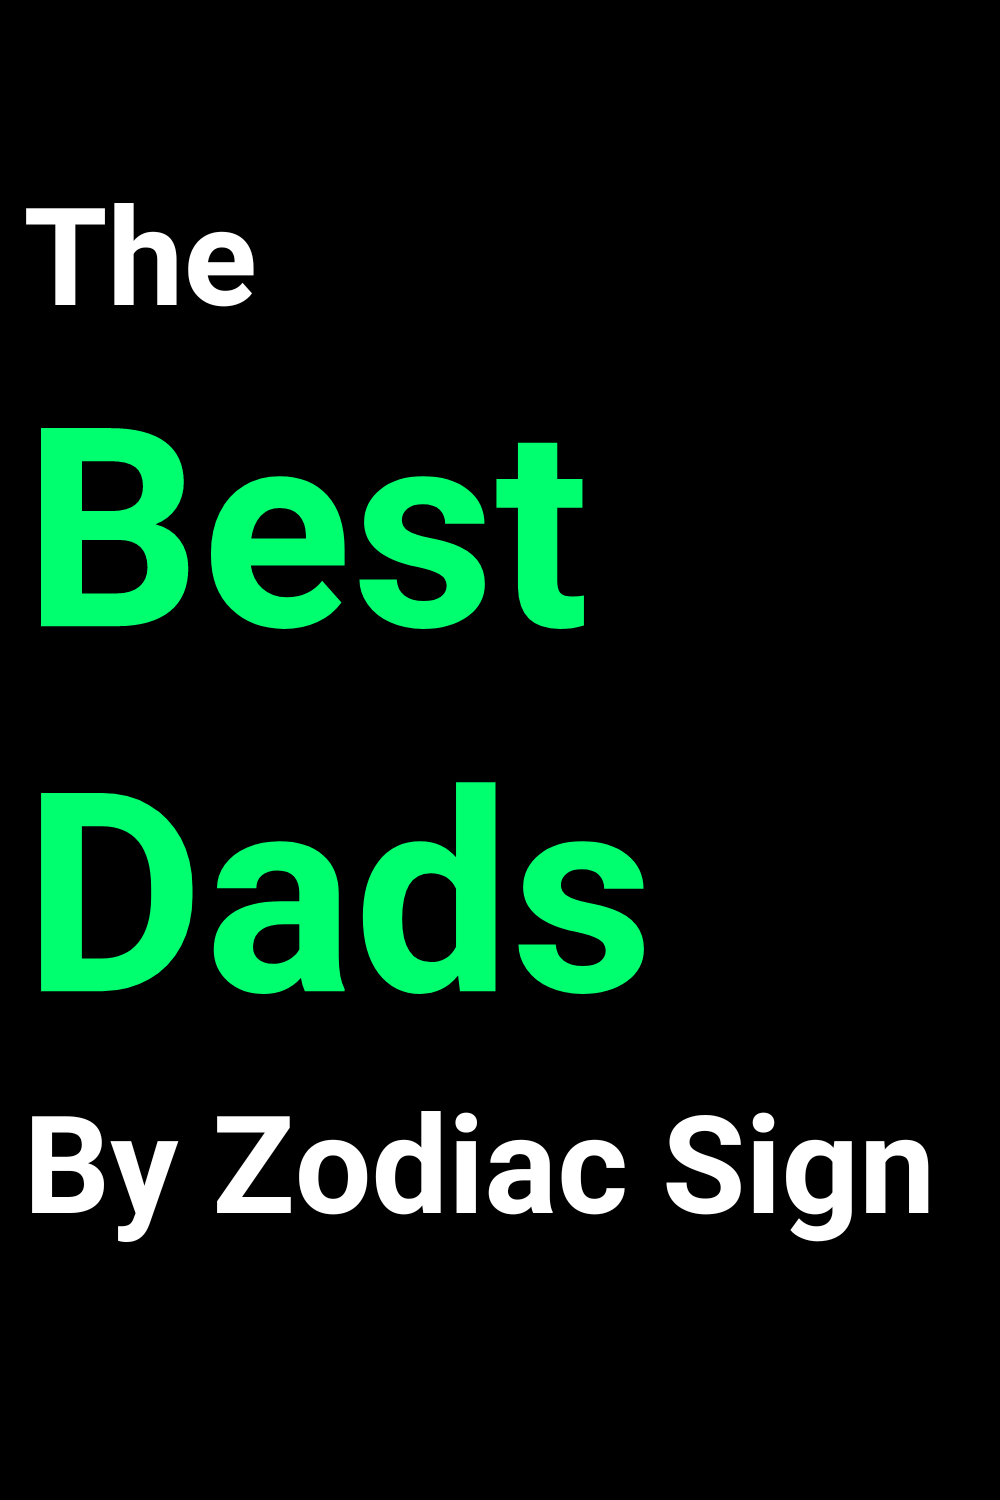 The Best Dads By Zodiac Sign